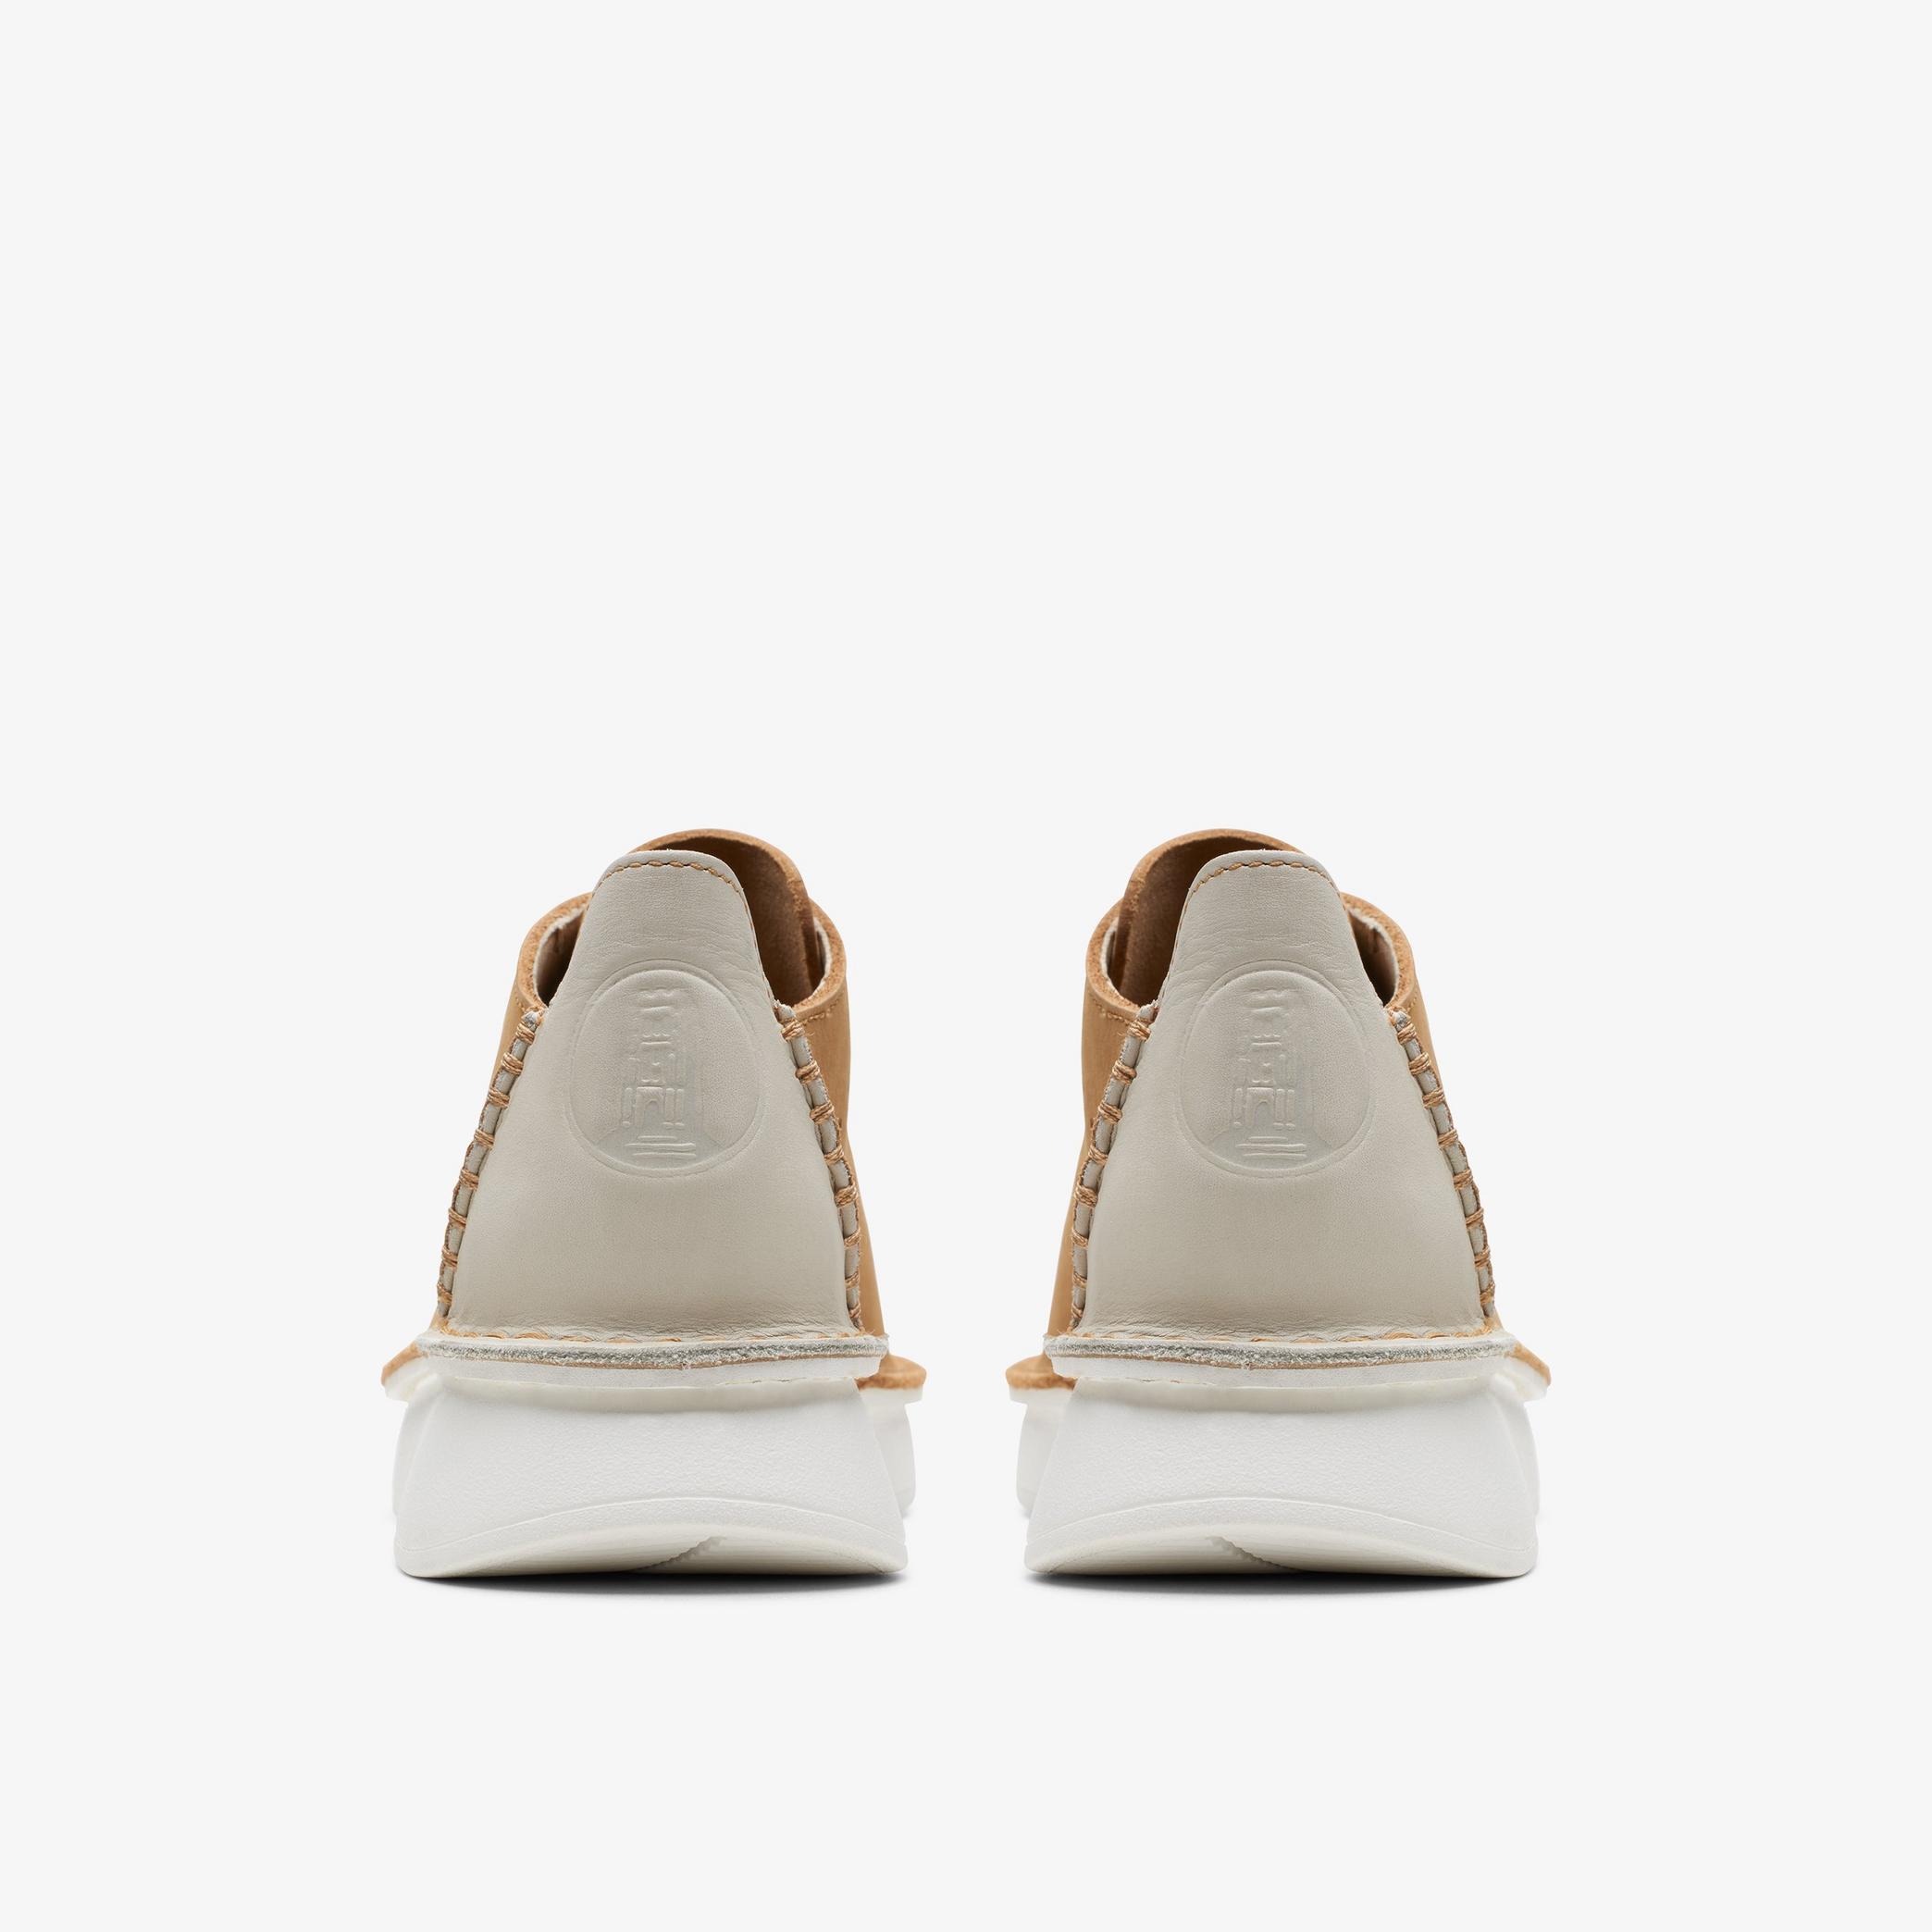 Velhill Etch Light Tan Combination Sneakers, view 5 of 6